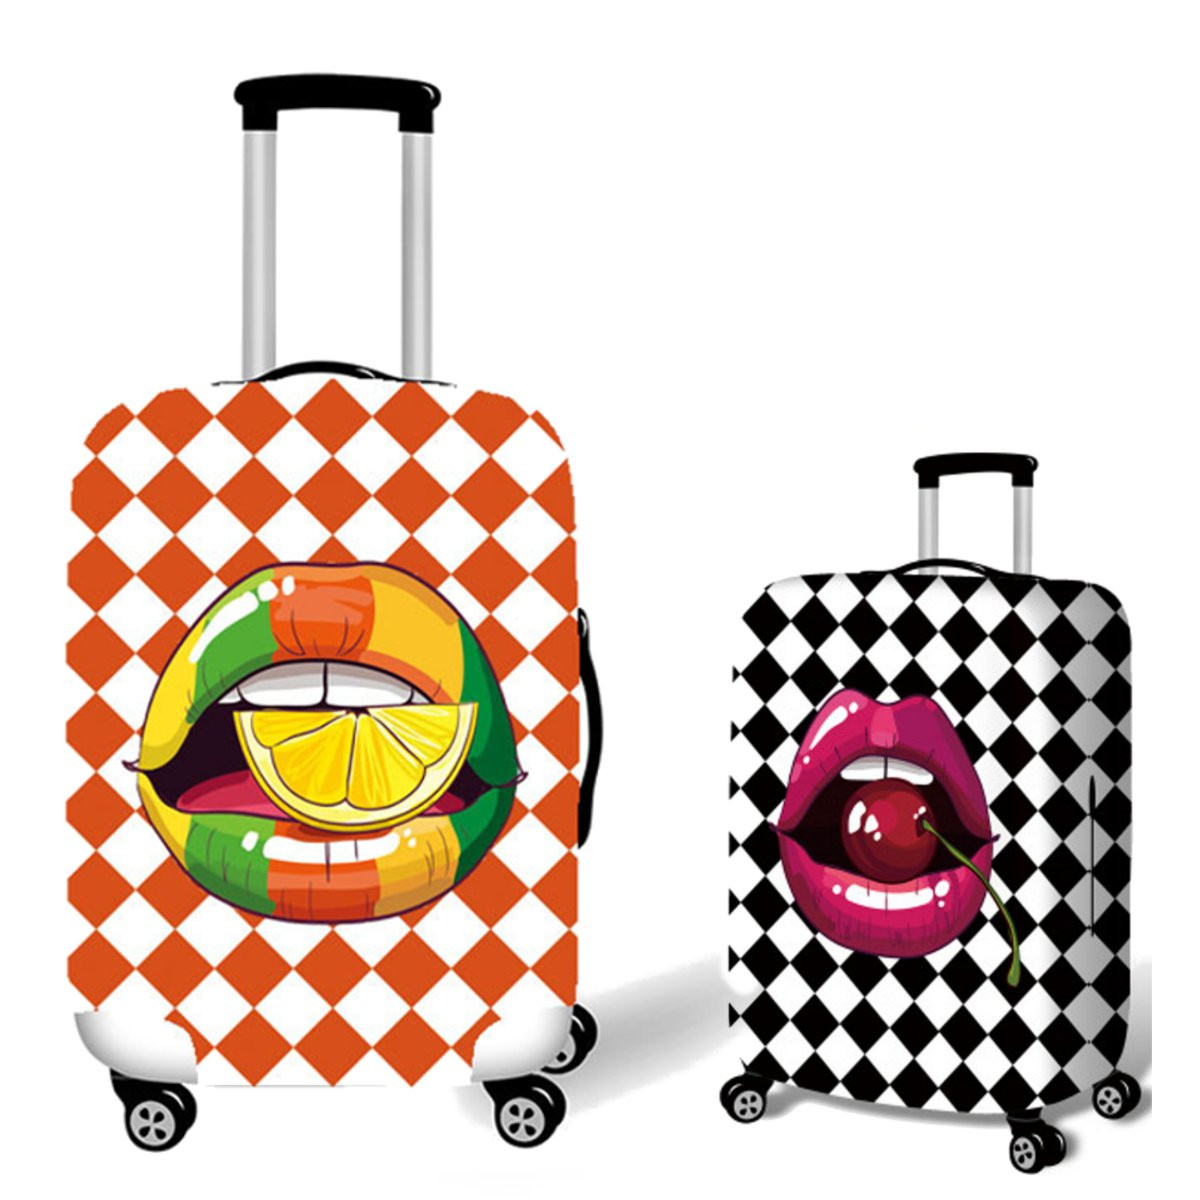 18-32-Inch-Polyester-Elastic-Luggage-Cover-Travel-Suitcase-Dustproof-Protector-Sleeve-1401433-1